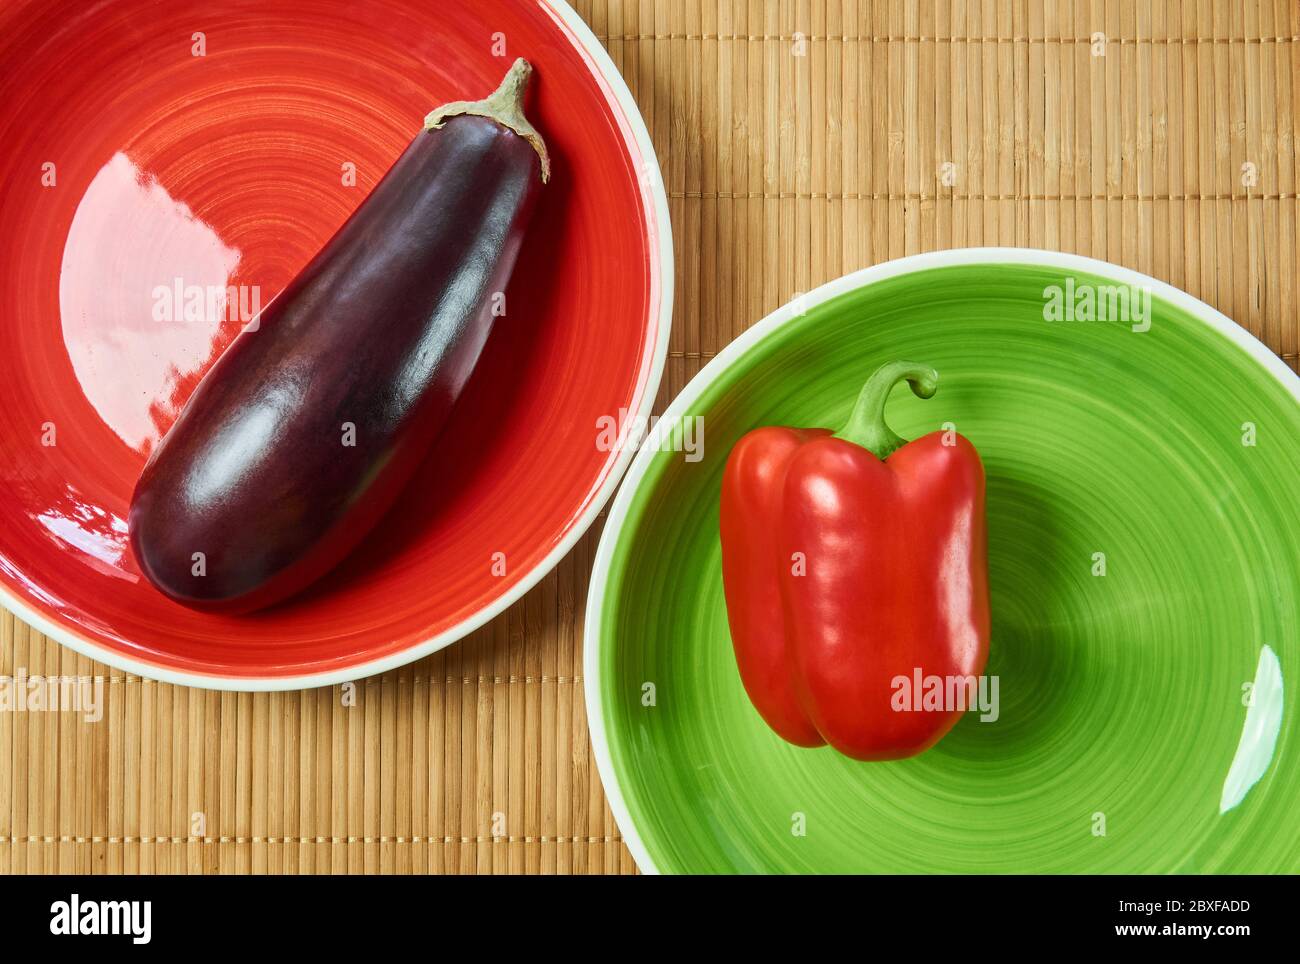 color contrasting still life - purple eggplant on a red plate and red bell pepper on a green plate next on a cane serving mat Stock Photo